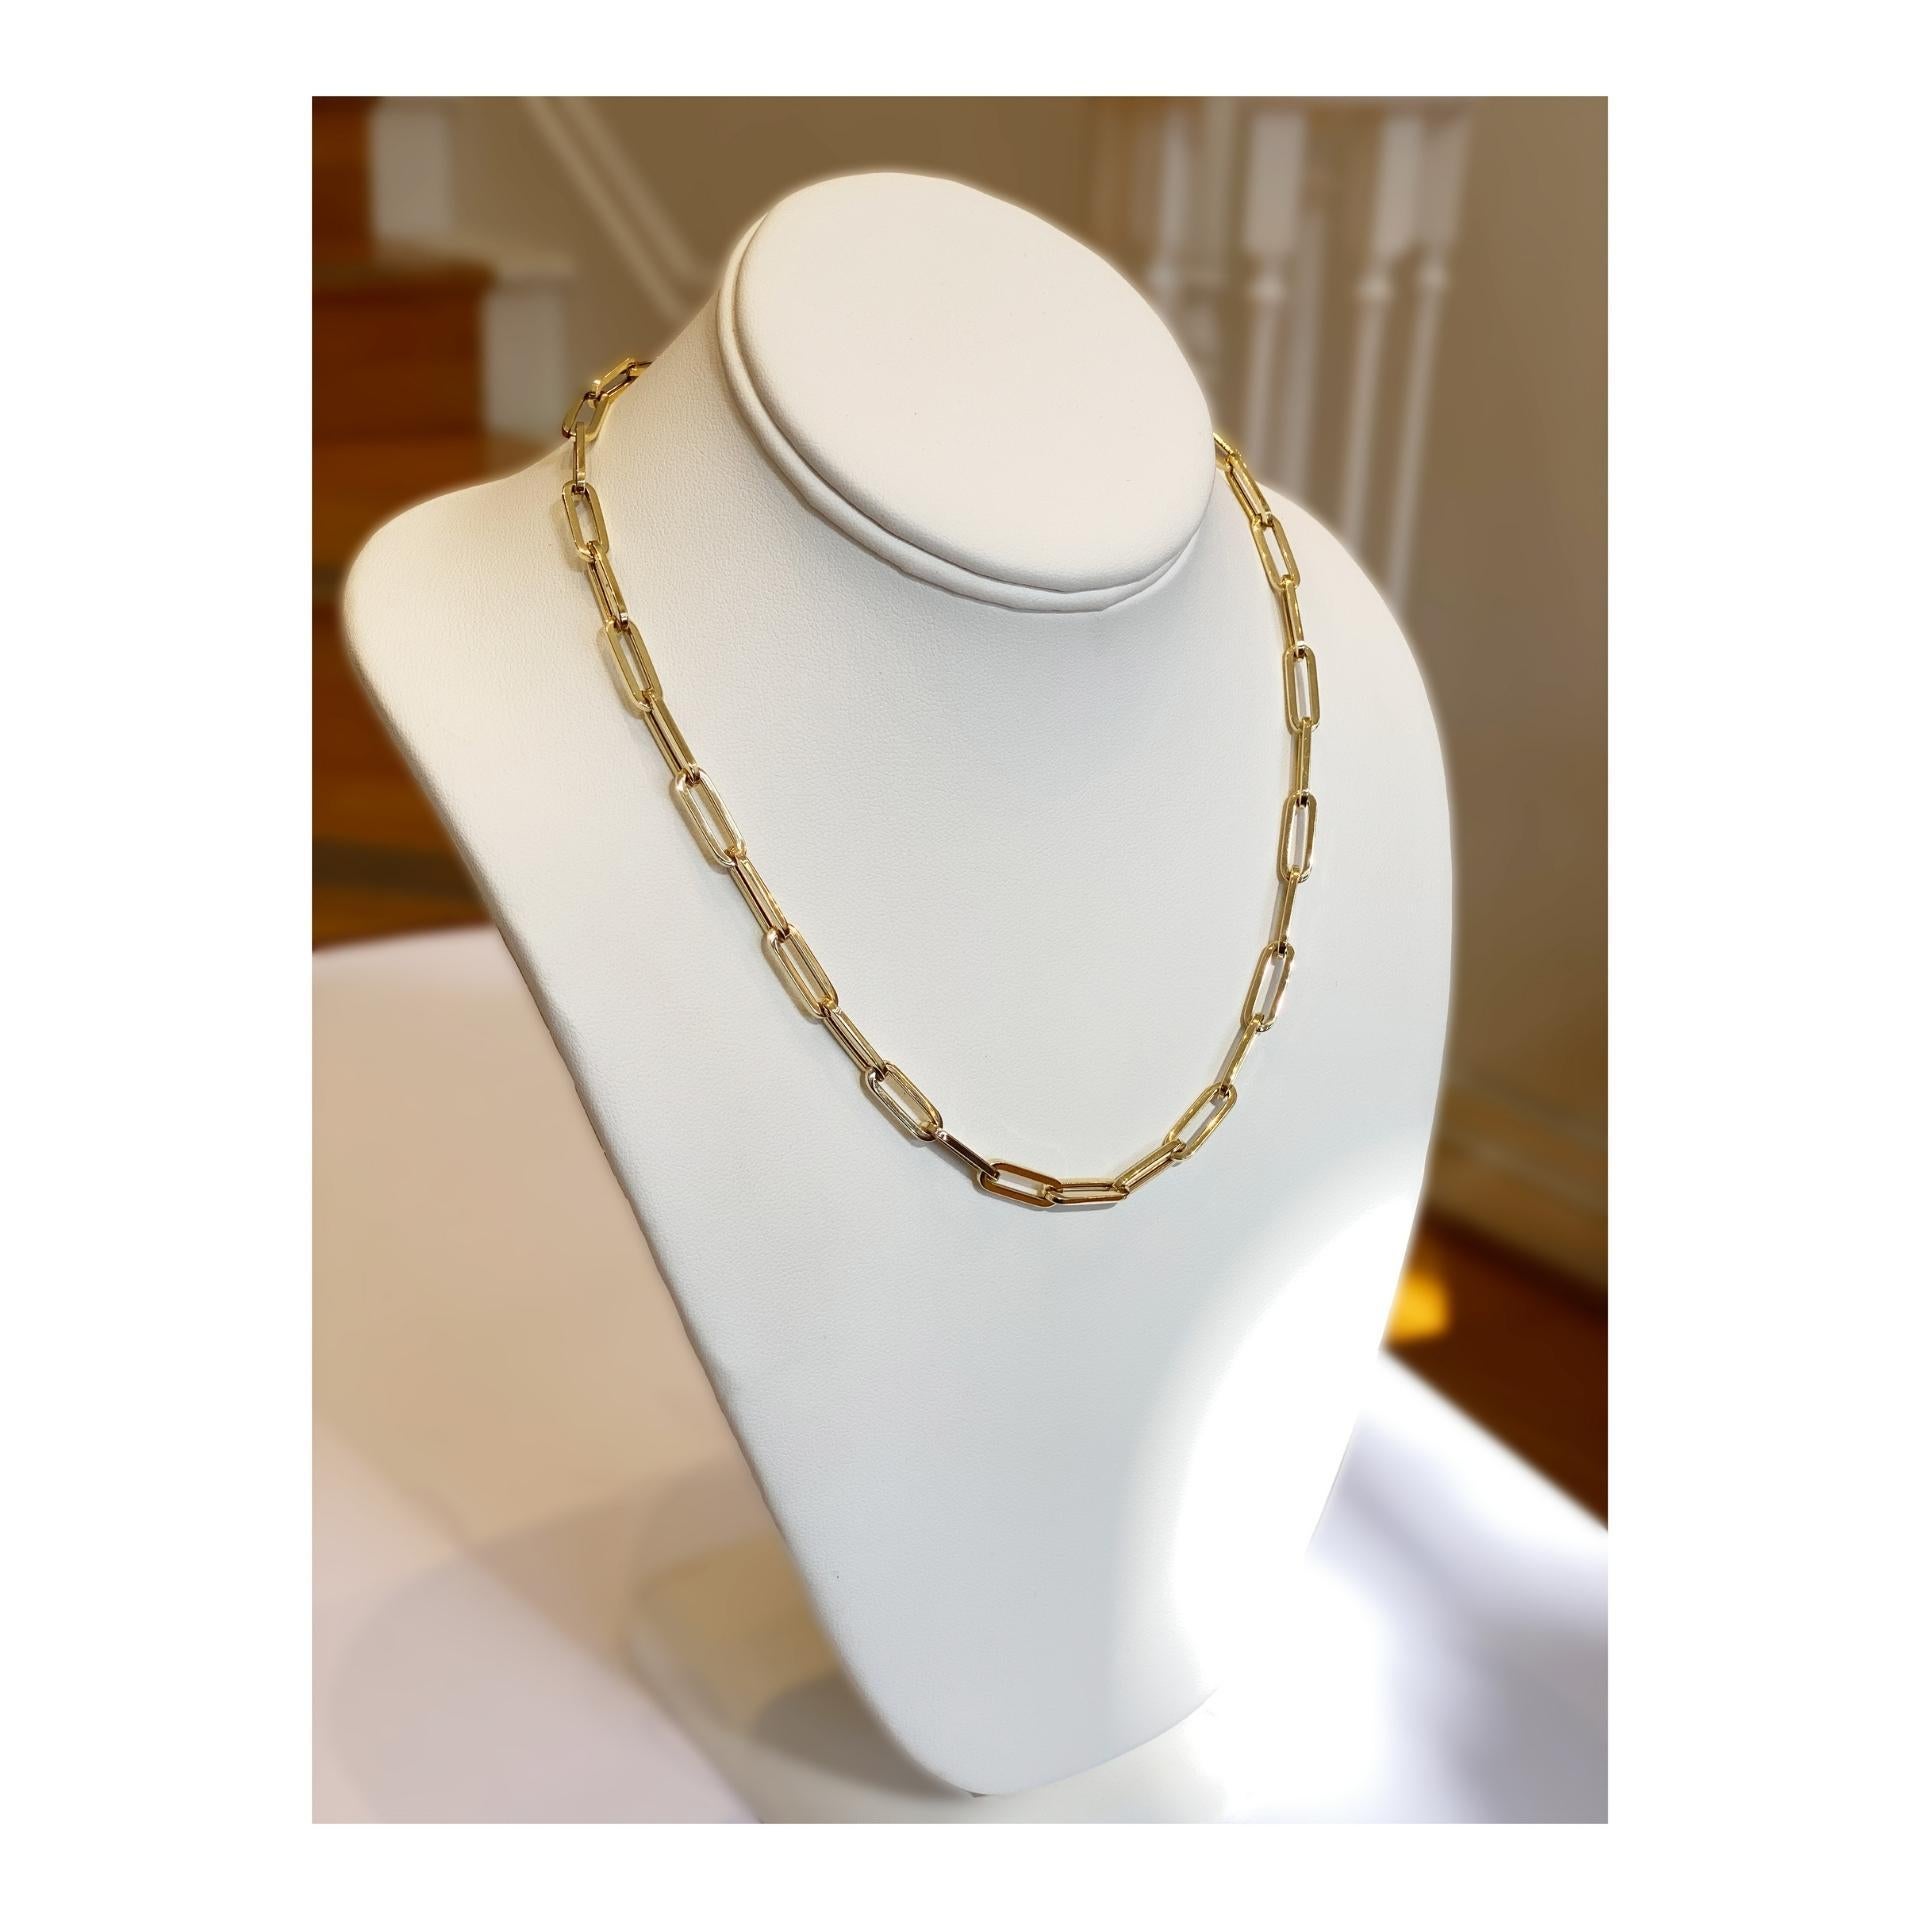 Paperclip Gold Necklace 5.30mm in 18K Yellow Gold 18 inches

Set in 18K Yellow Gold

Length: 18.0 inches

Width of Paperclip: 5.30 mm

Stock #: J5732

ALSO AVAILABLE IN 16